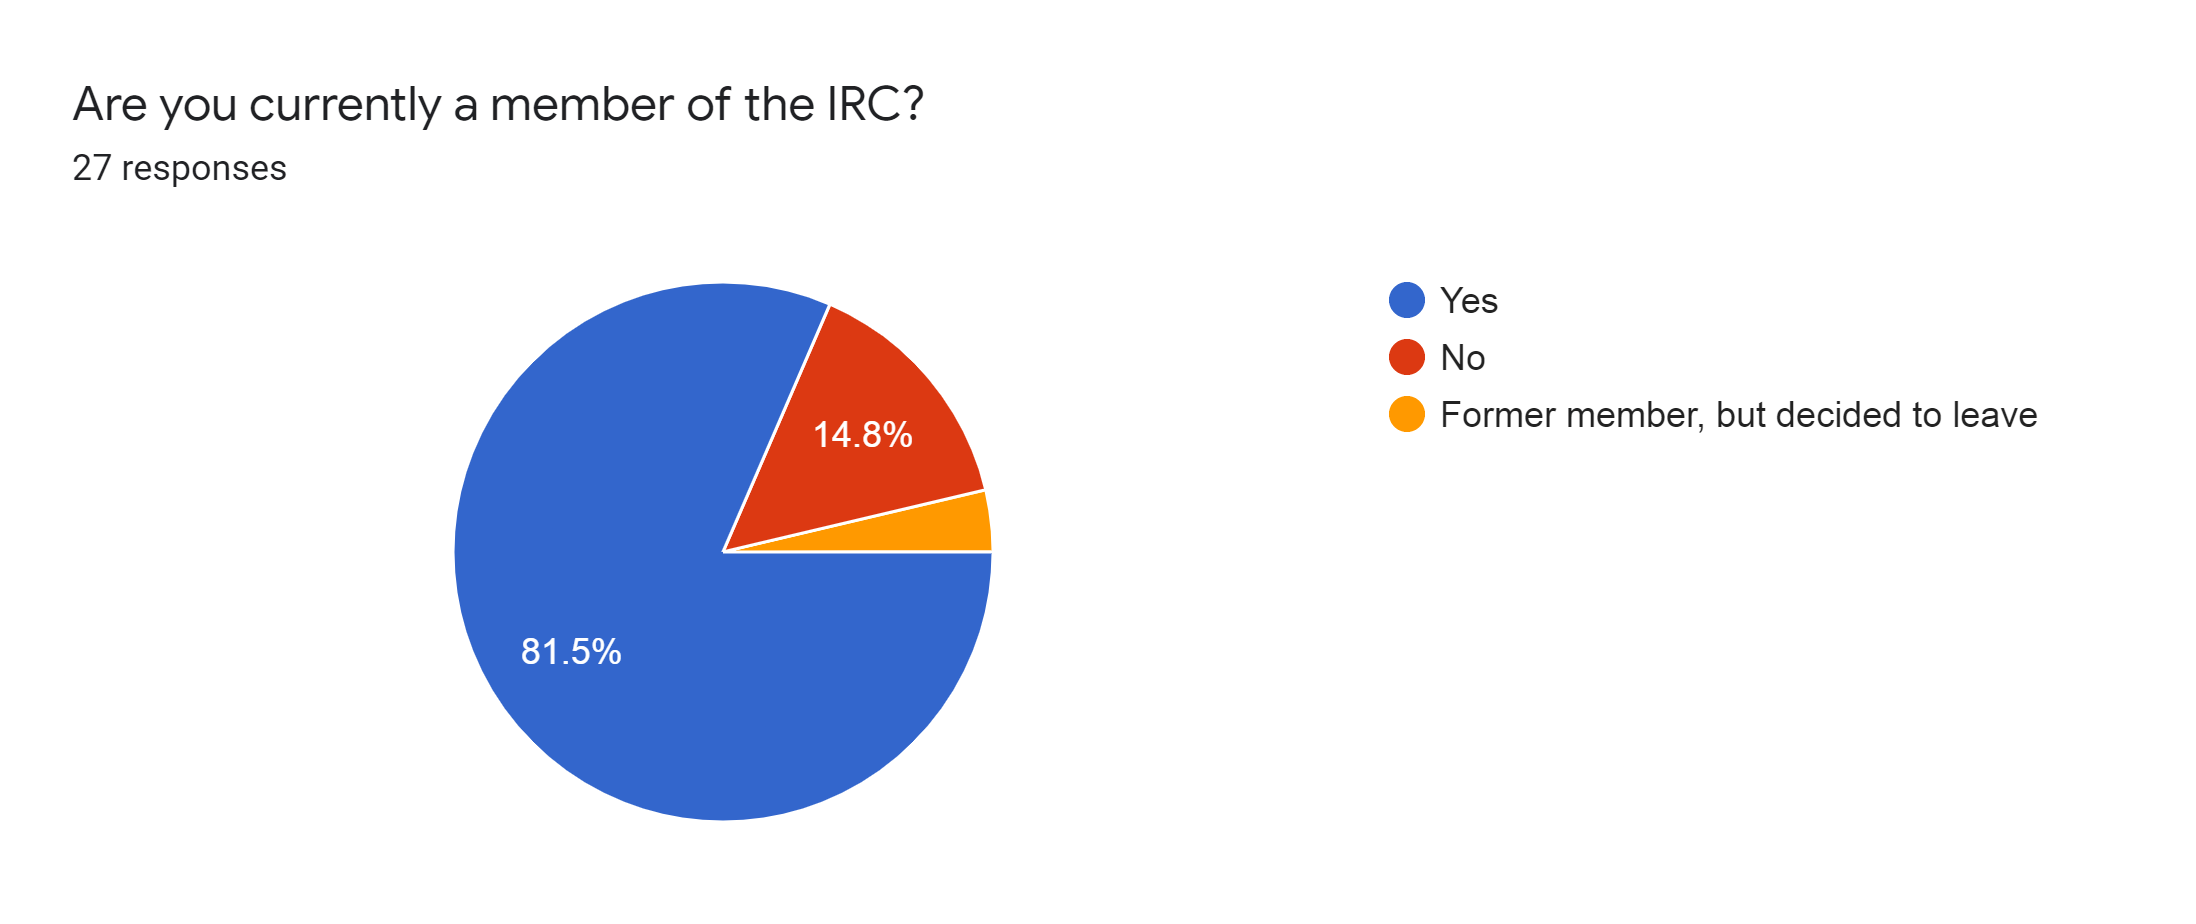 Forms response chart. Question title: Are you currently a member of the IRC?. Number of responses: 27 responses.